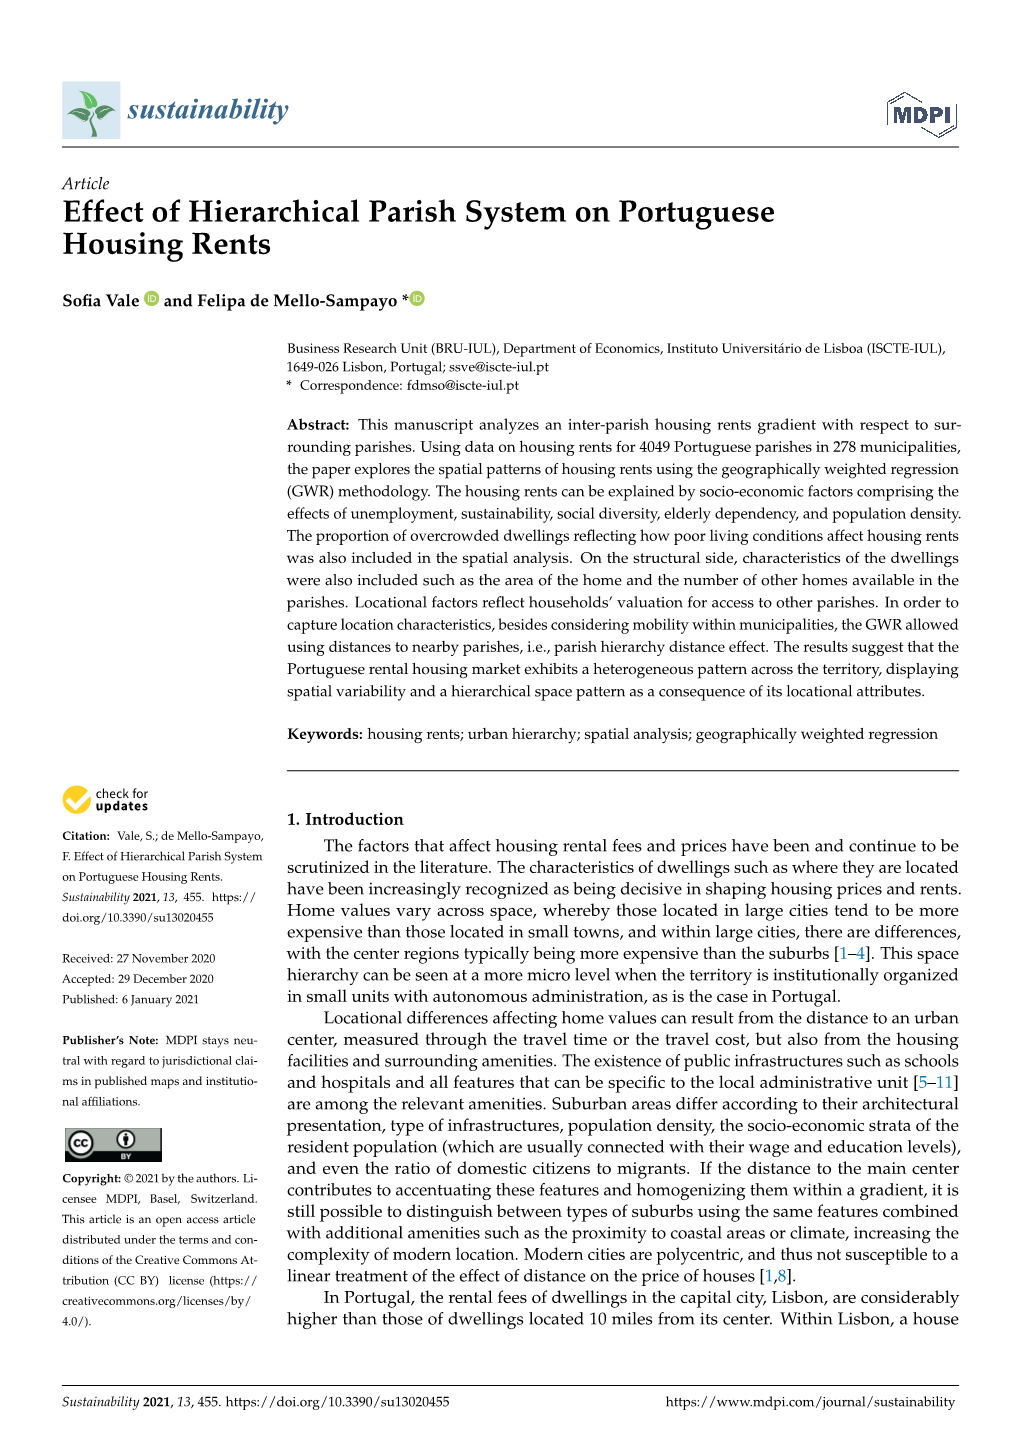 Effect of Hierarchical Parish System on Portuguese Housing Rents